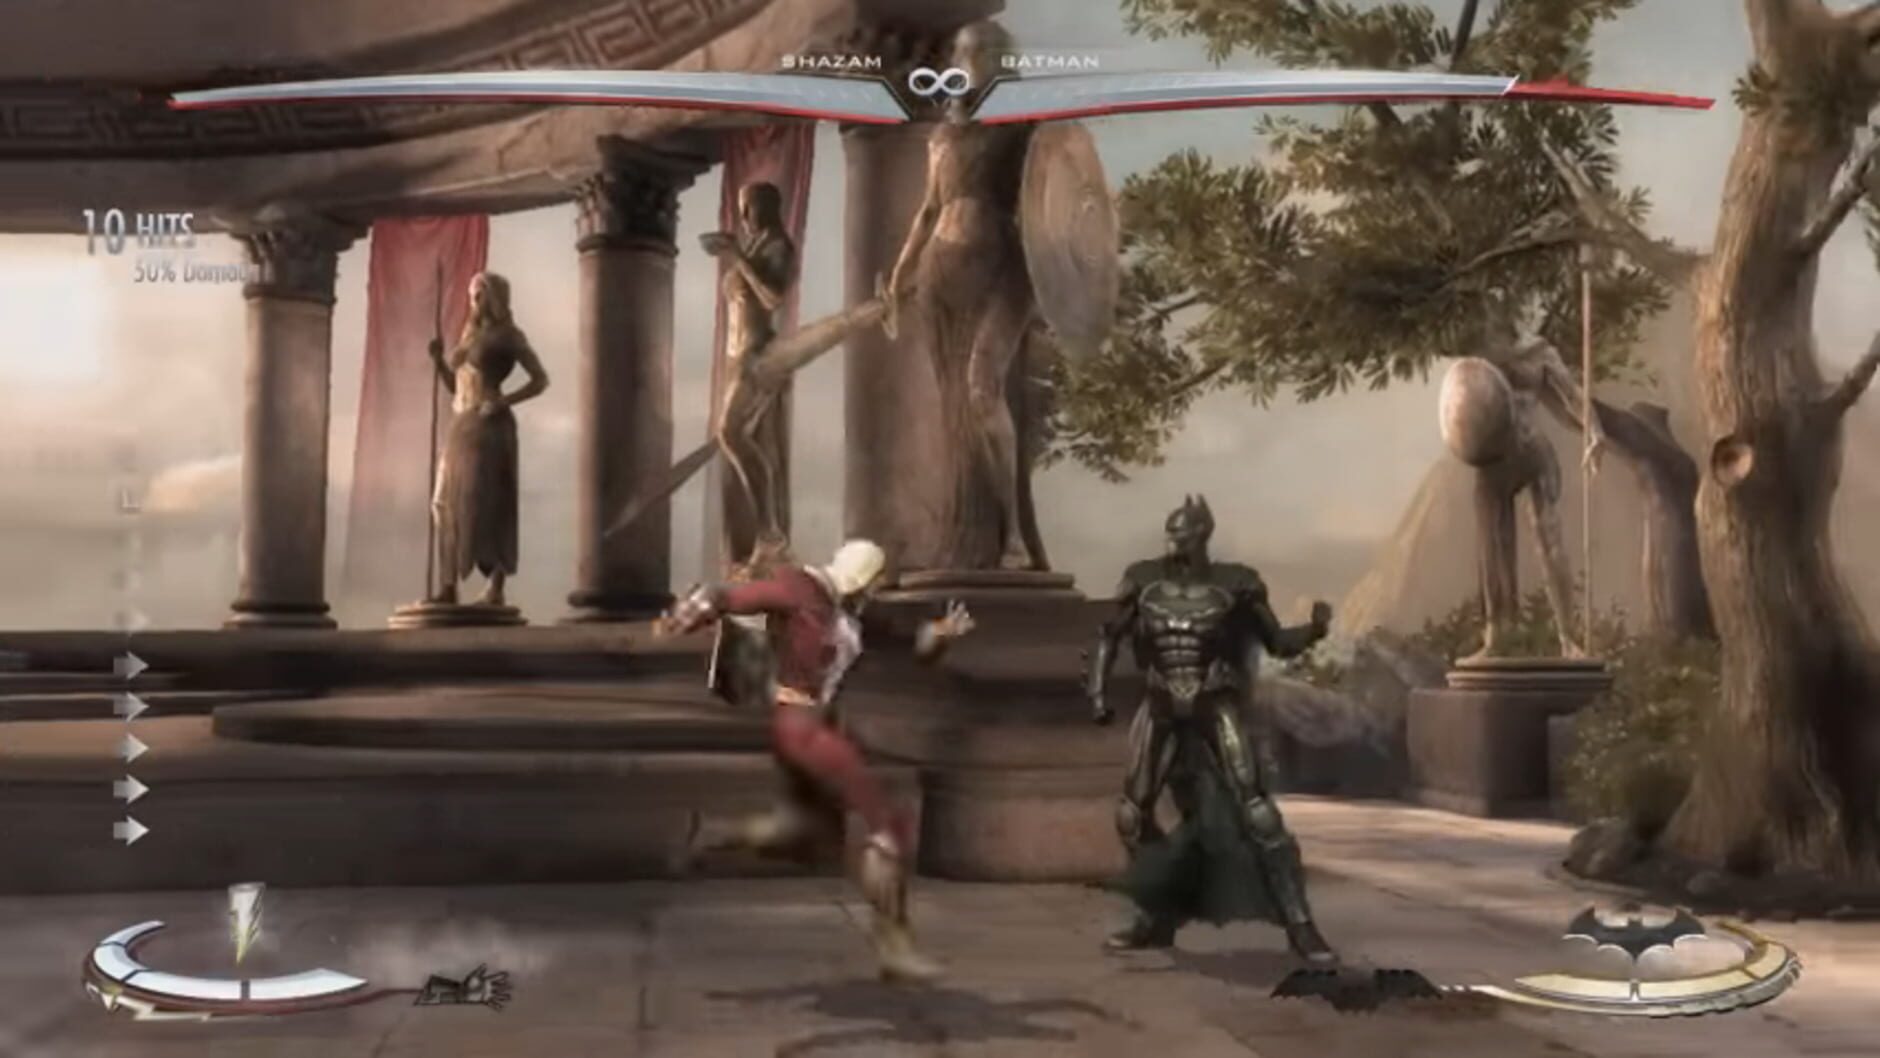 Screenshot for Injustice: Gods Among Us - Collector's Edition